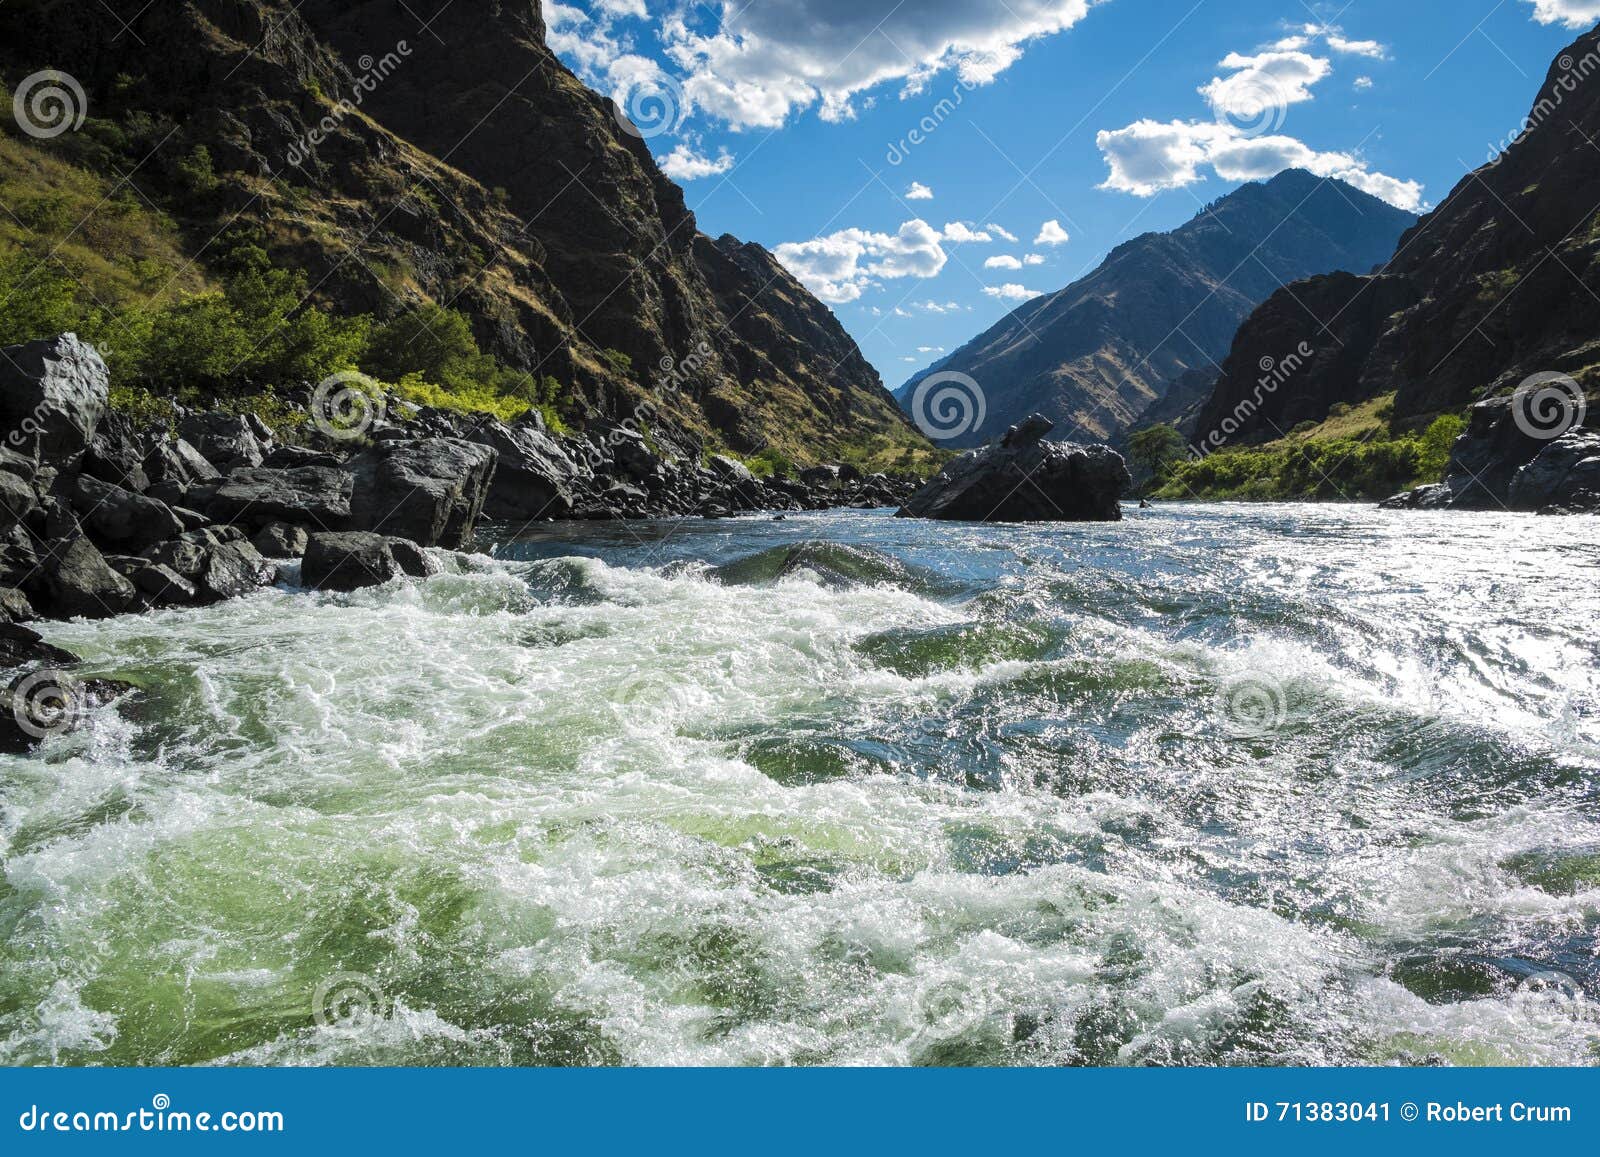 whitewater rapids in hells canyon, idaho